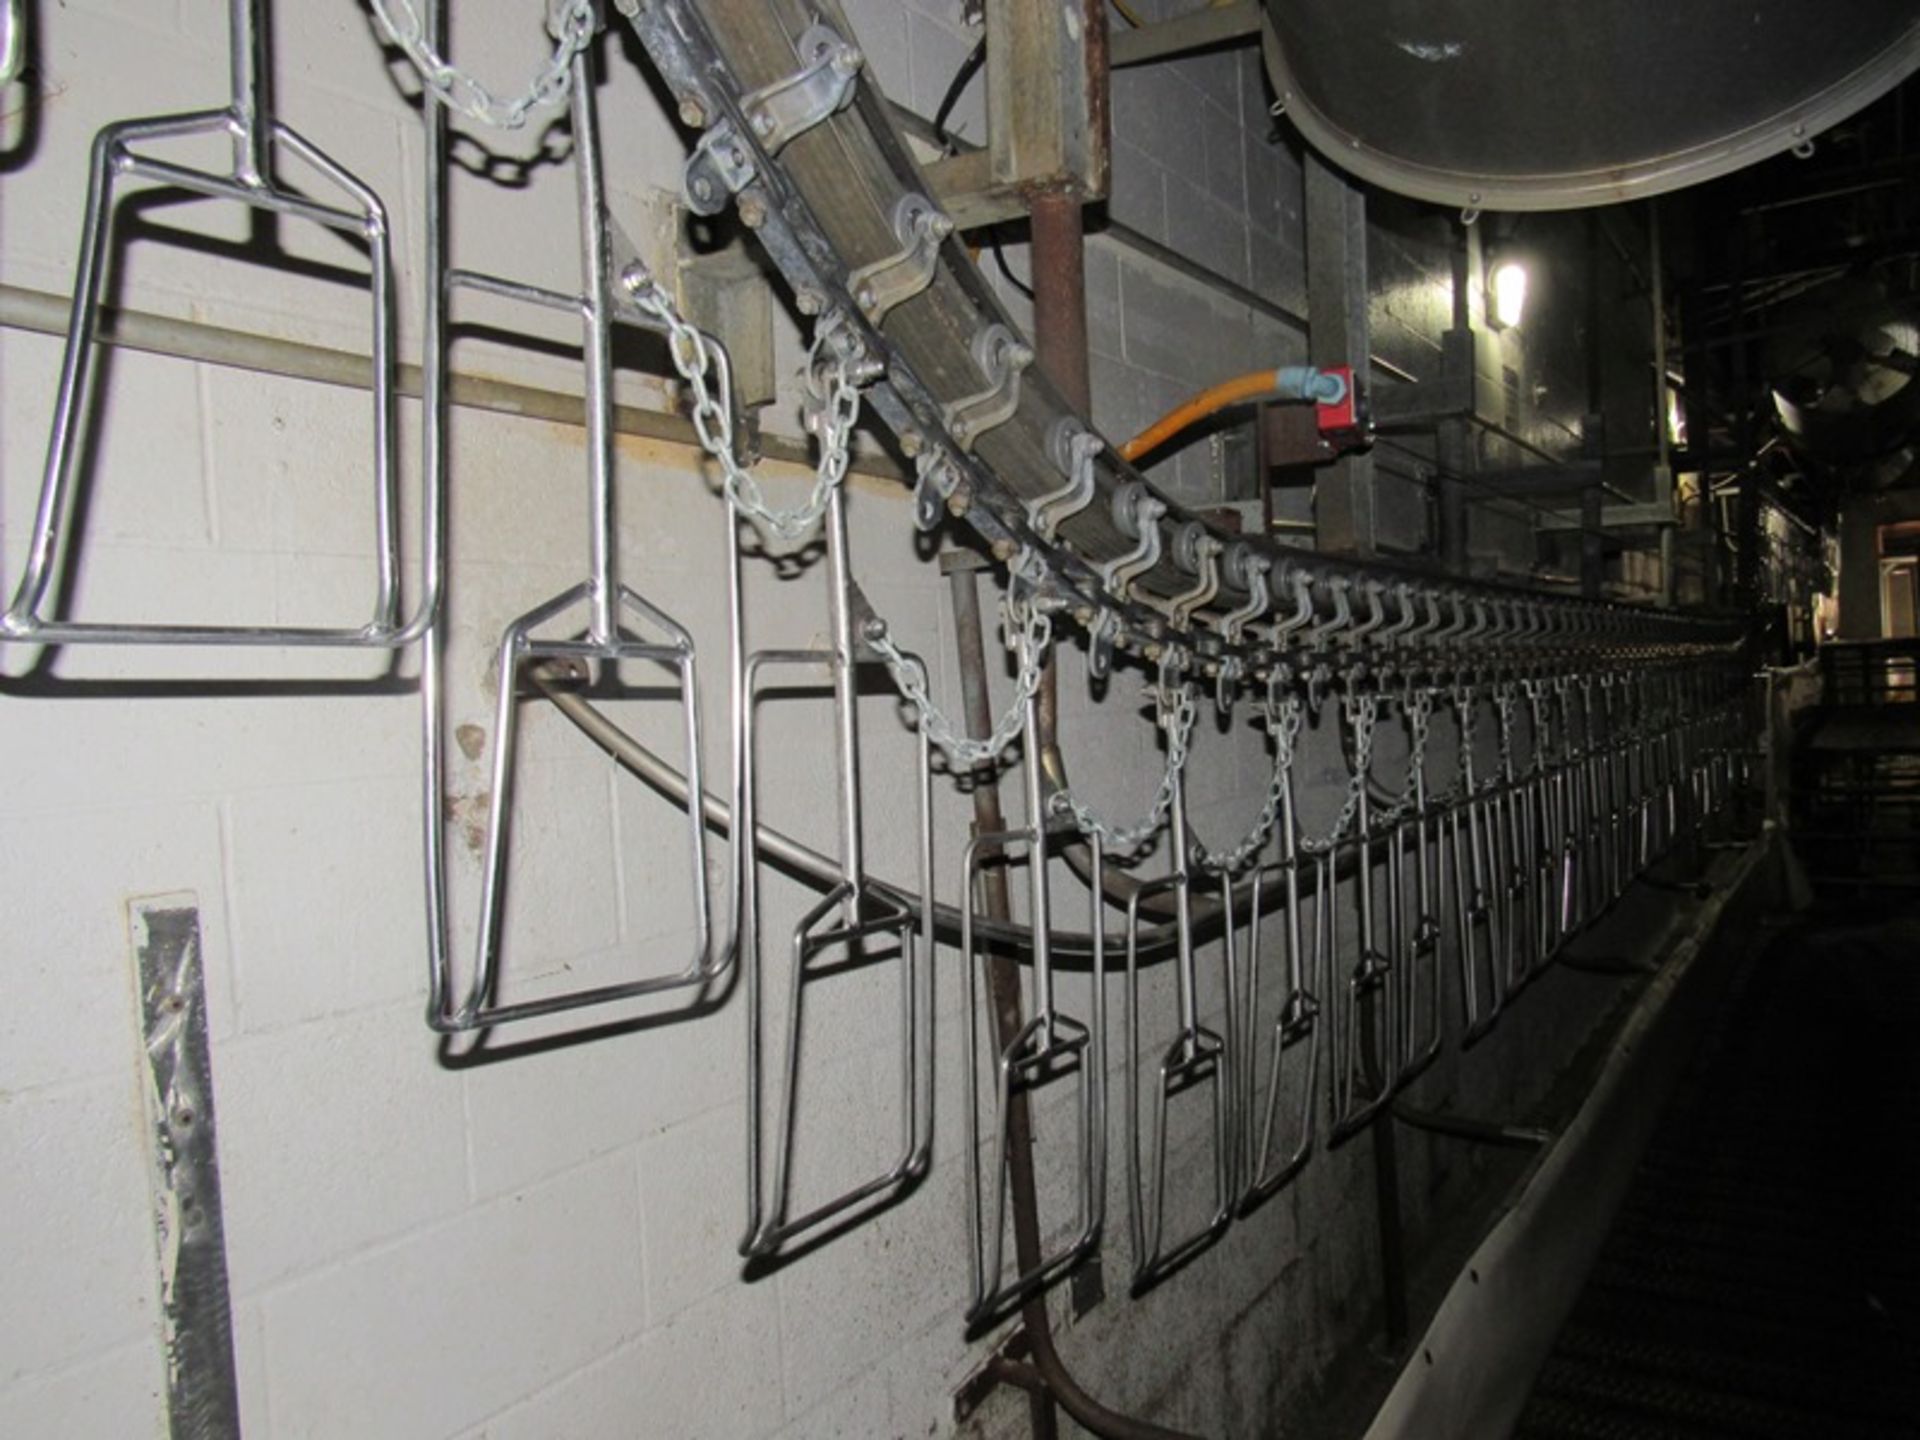 Lot Rail, Hangers and Chain approx. 800 stainless steel turkey Hangers on approx. | Rig Fee: $5200 - Image 3 of 15